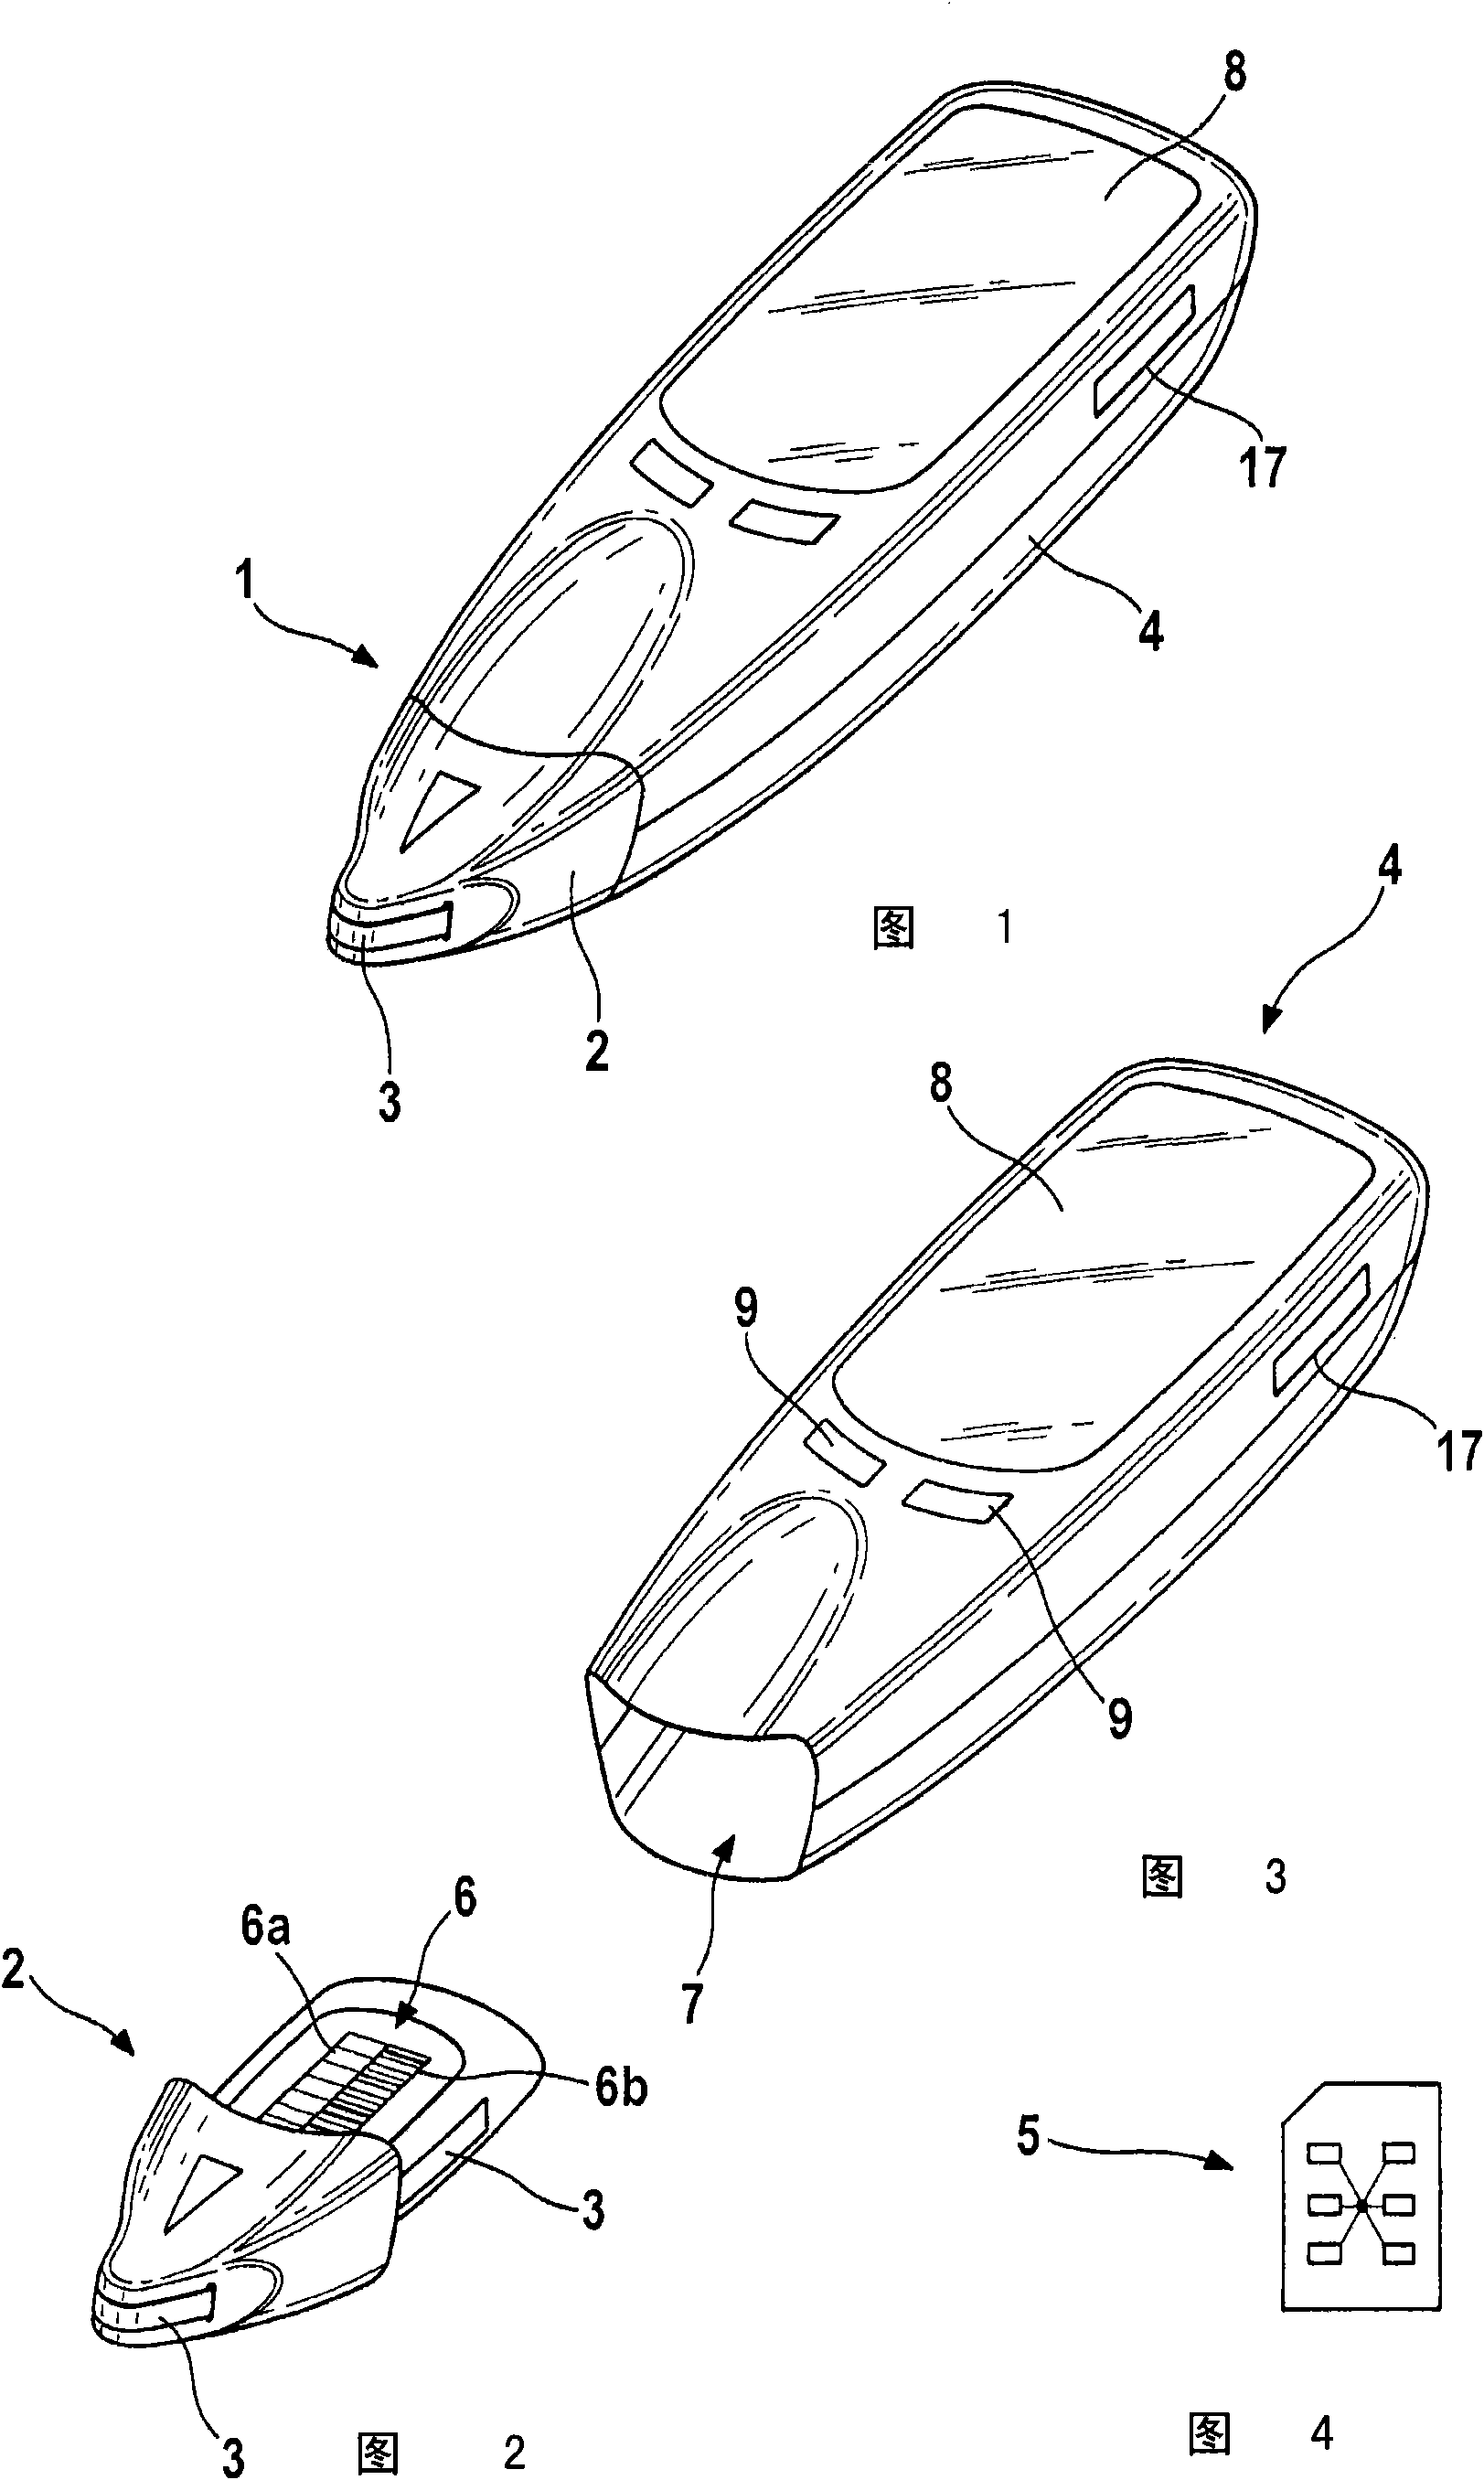 System for measuring an analyte concentration in a bodily fluid sample